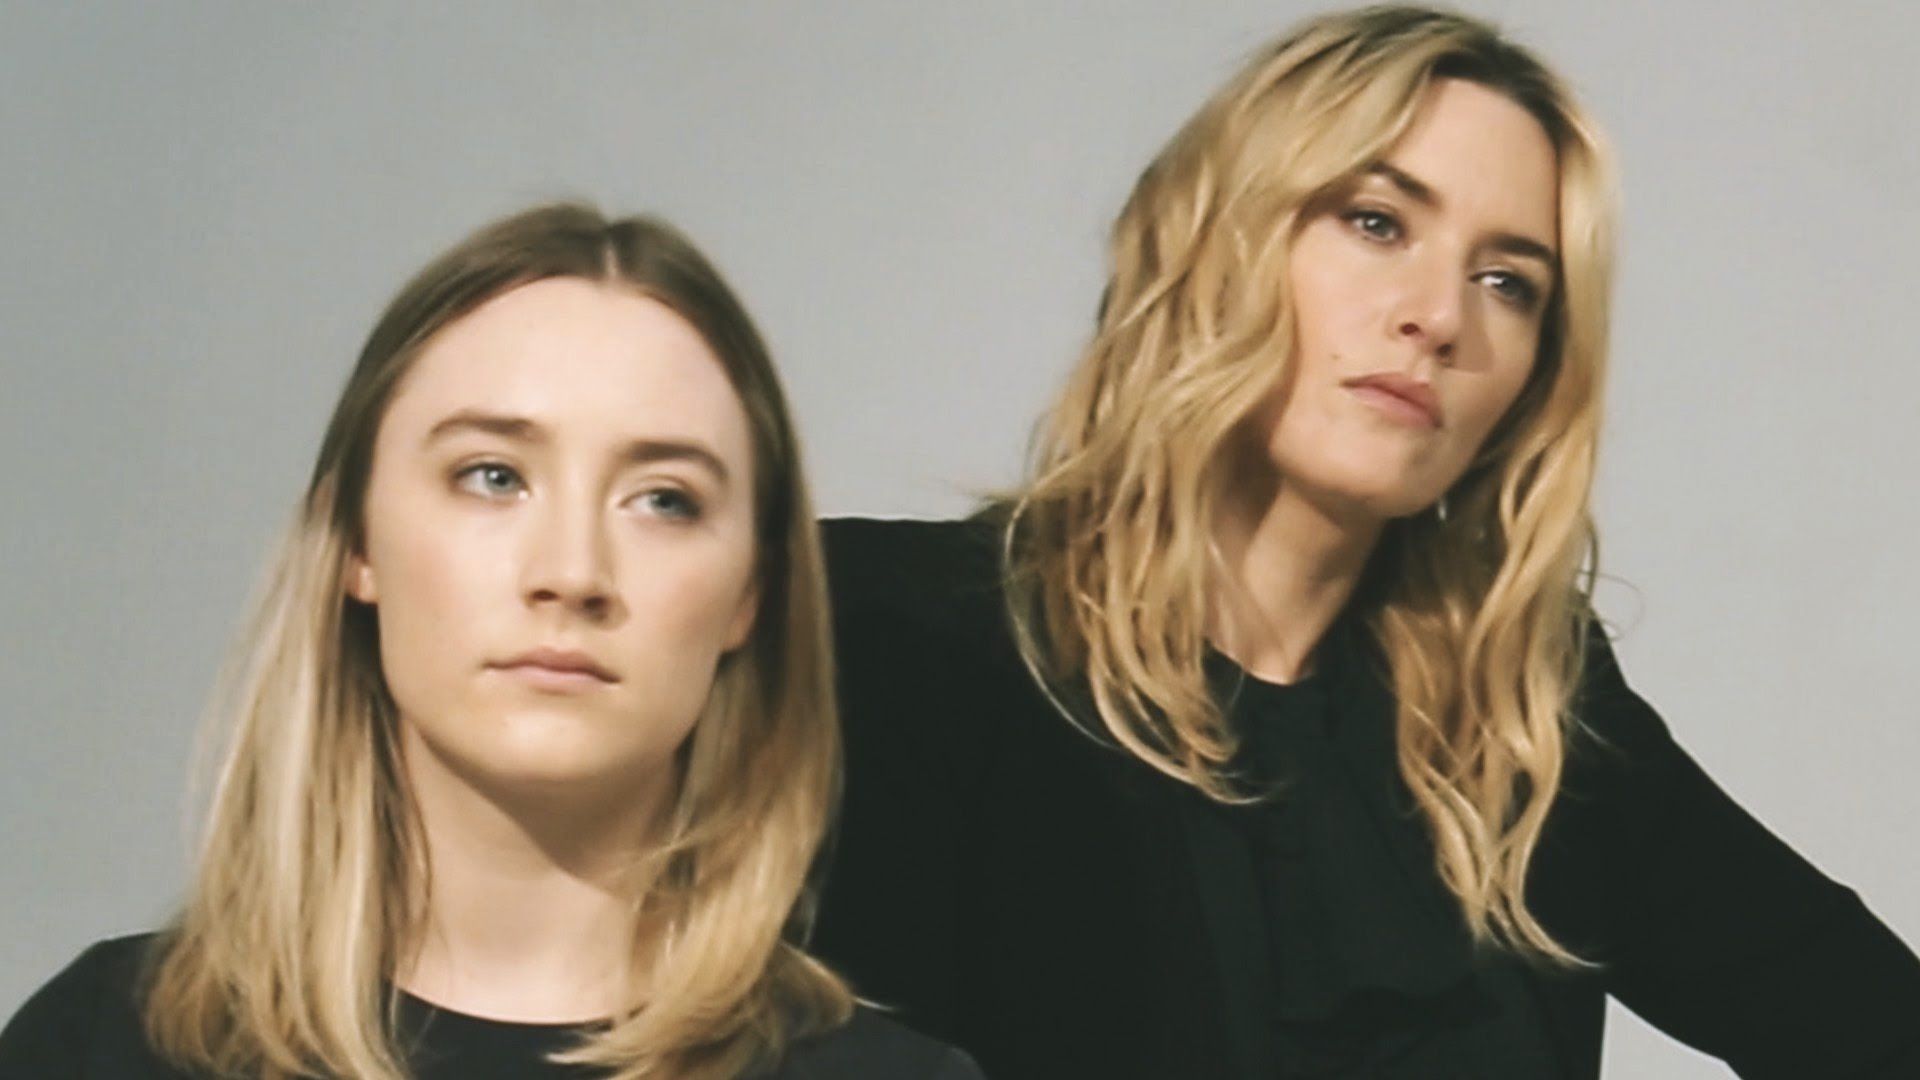 Kate Winslet And Saoirse Ronan Set To Star In Romance Drama AMMONITE